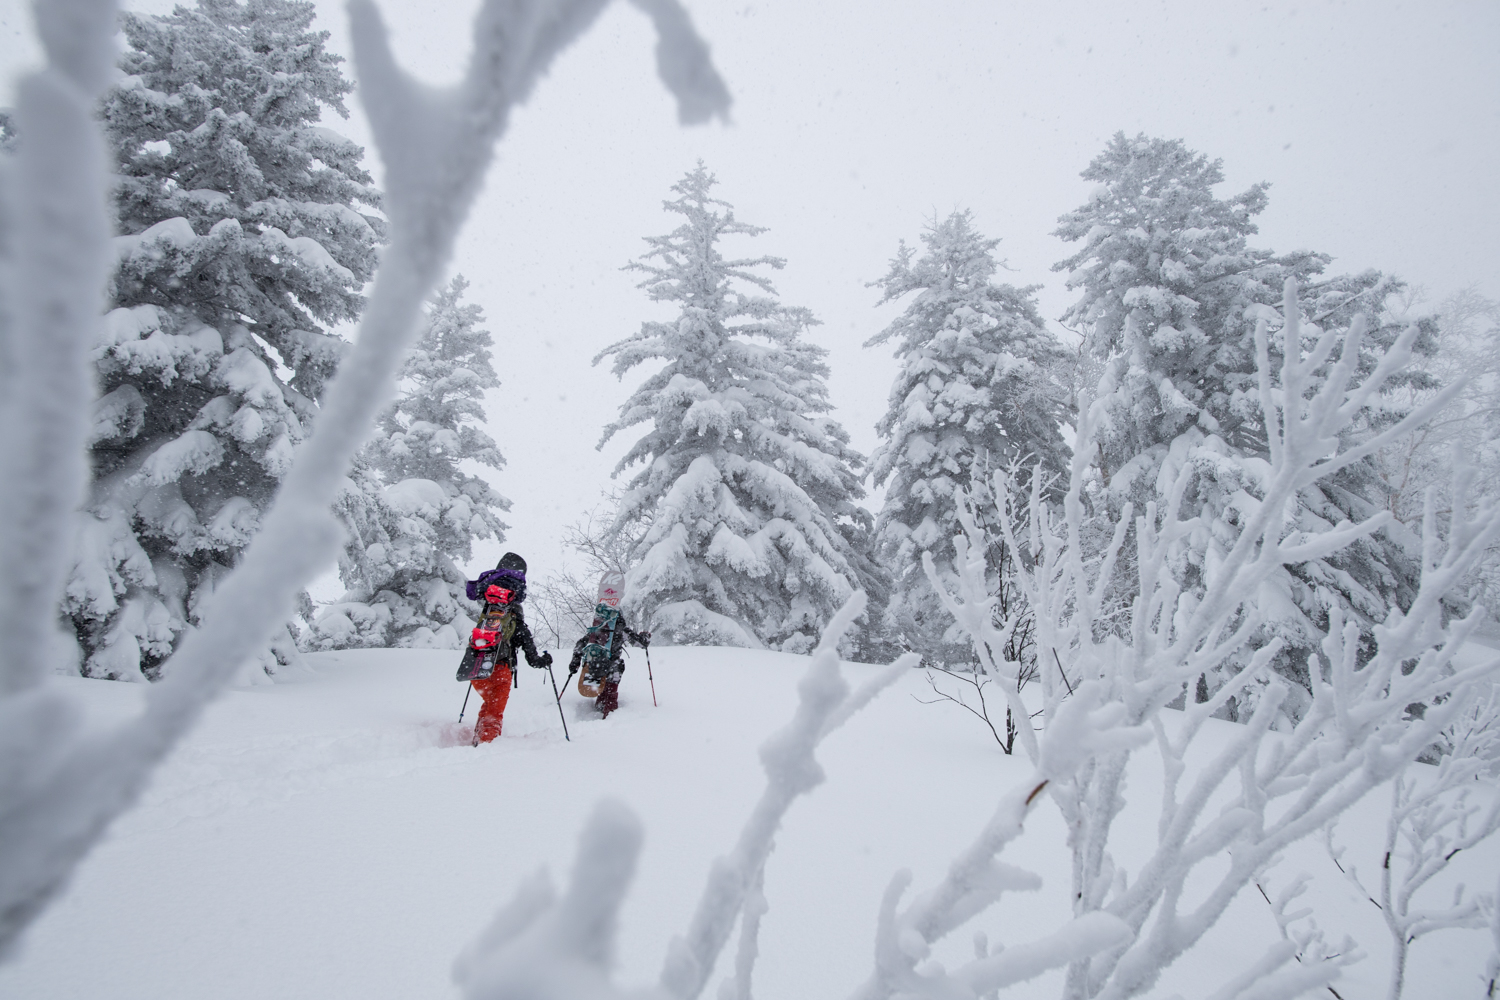 Climb the deep snowy slopes of Mt. Furano, which I have longed for.It's a step-by-step process with physical strength, but the joy of coming here is greater. Photo: Takahiro Nakanishi